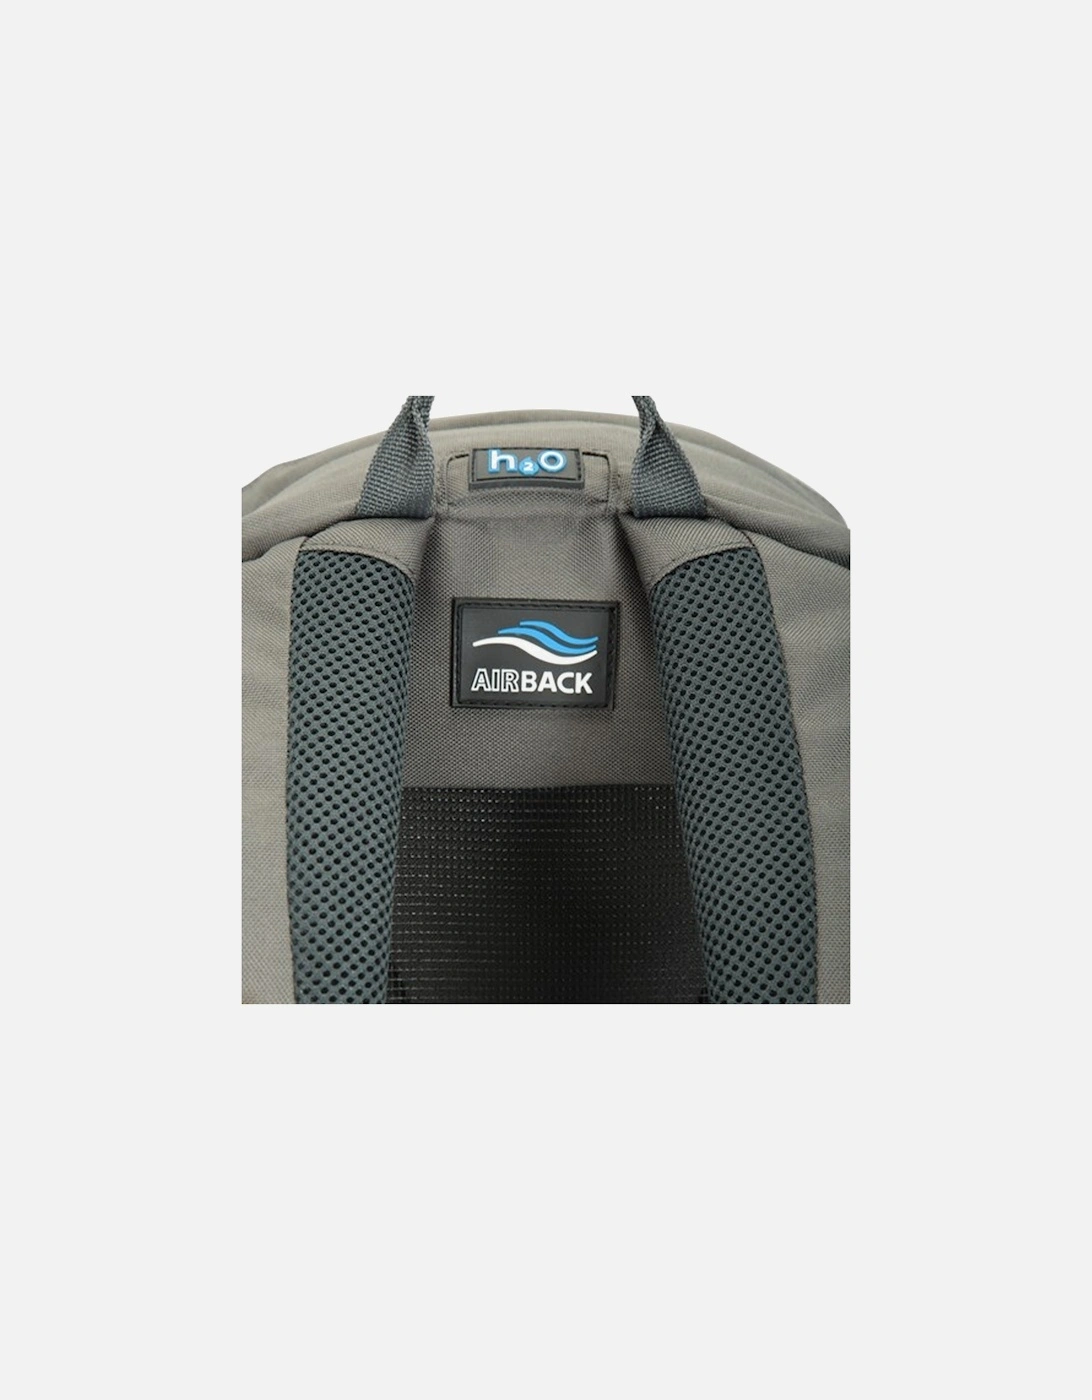 Pace 20L Backpack